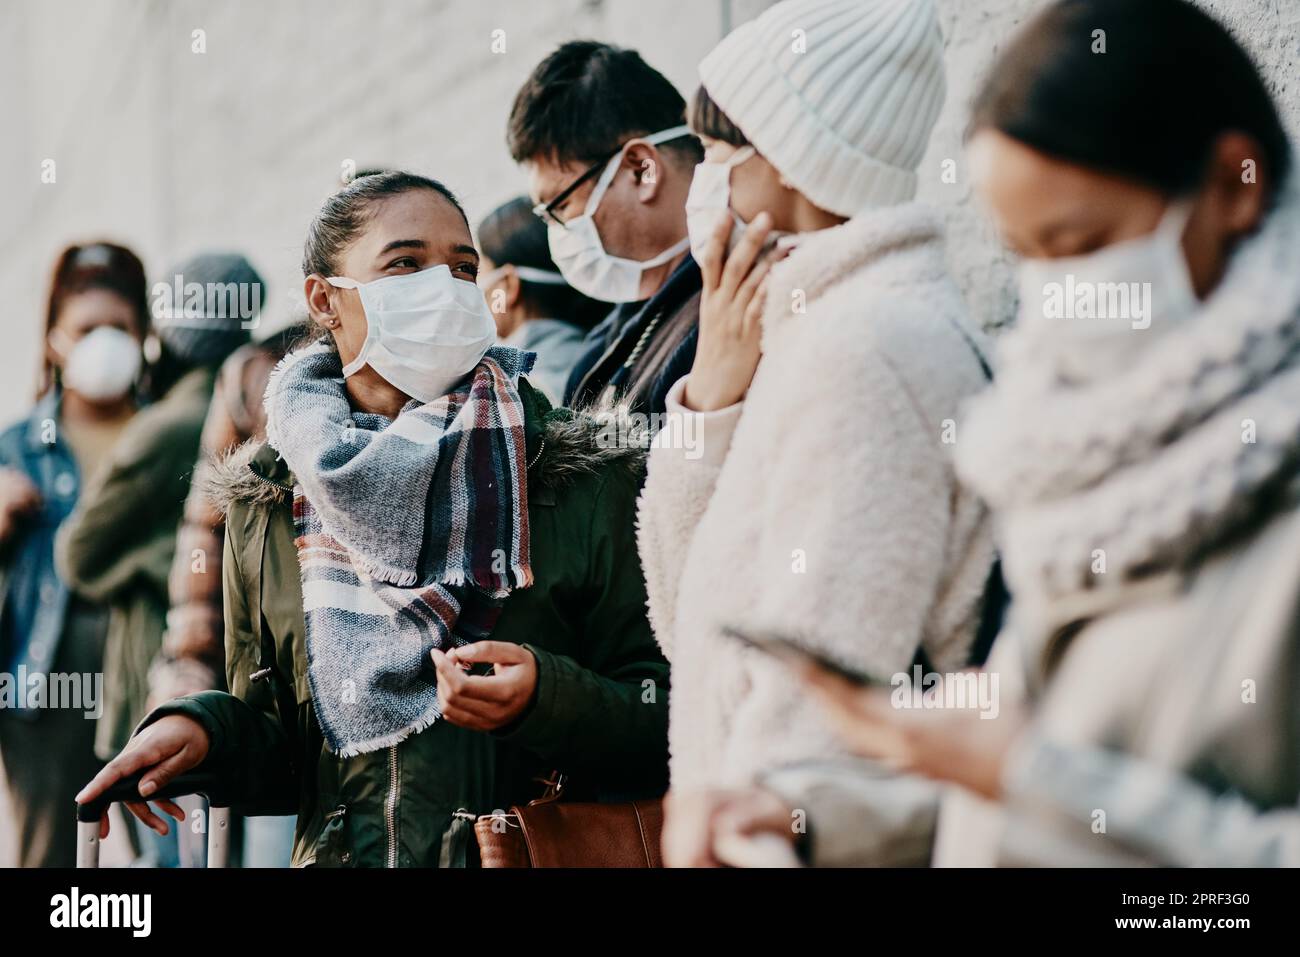 Travel restriction, Covid and face mask requirement for protection. Illness and public safety problems with commute in crowd. Risk of infection with global sickness or international disease. Stock Photo